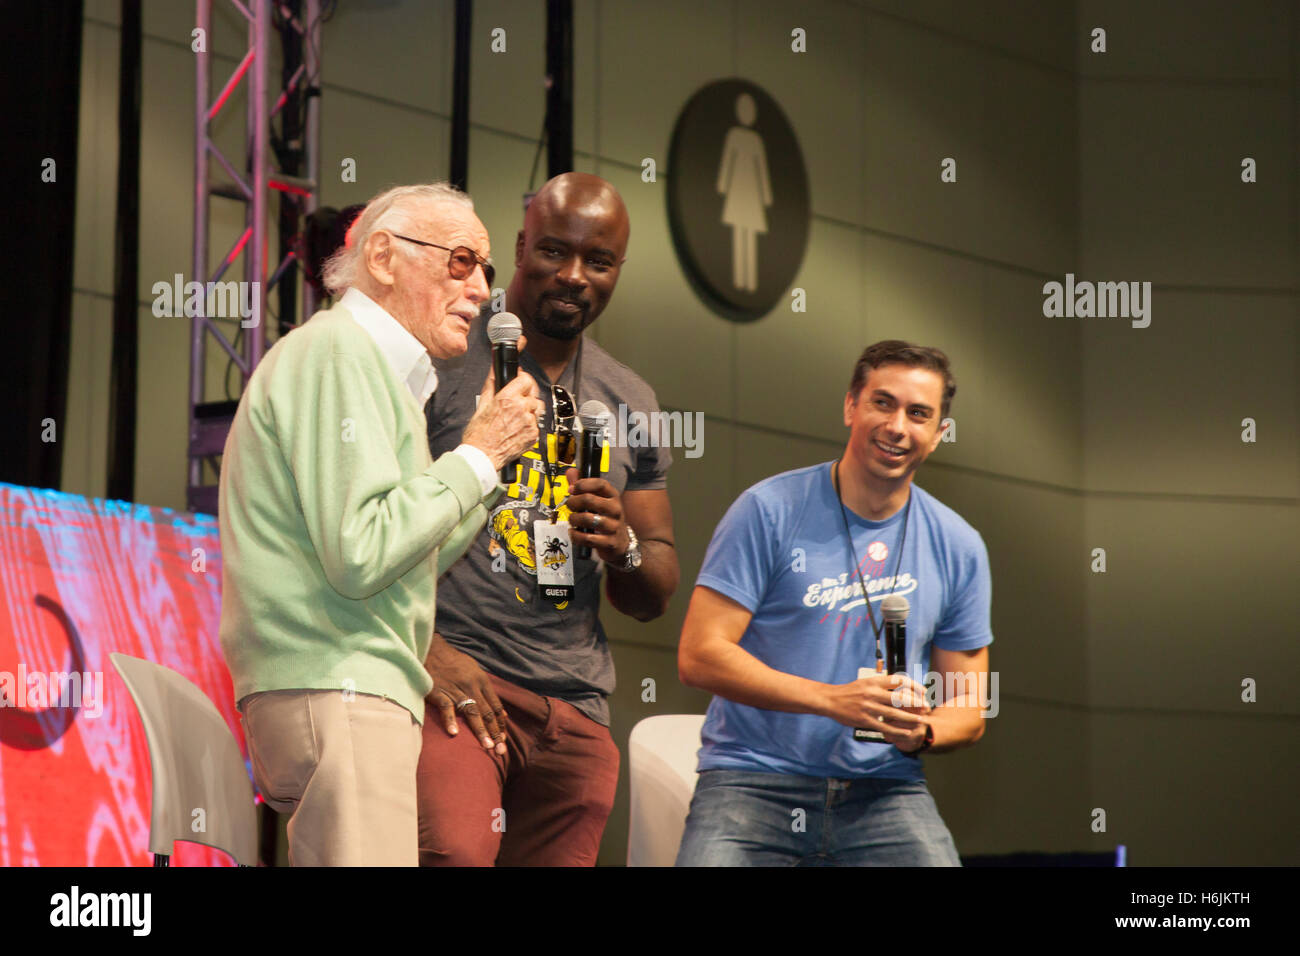 STAN LEE LA COMIC CON: October 29, 2016, Los Angeles, California. Luke Cage star Mike Colter with Marvel creator Stan Lee. Stock Photo